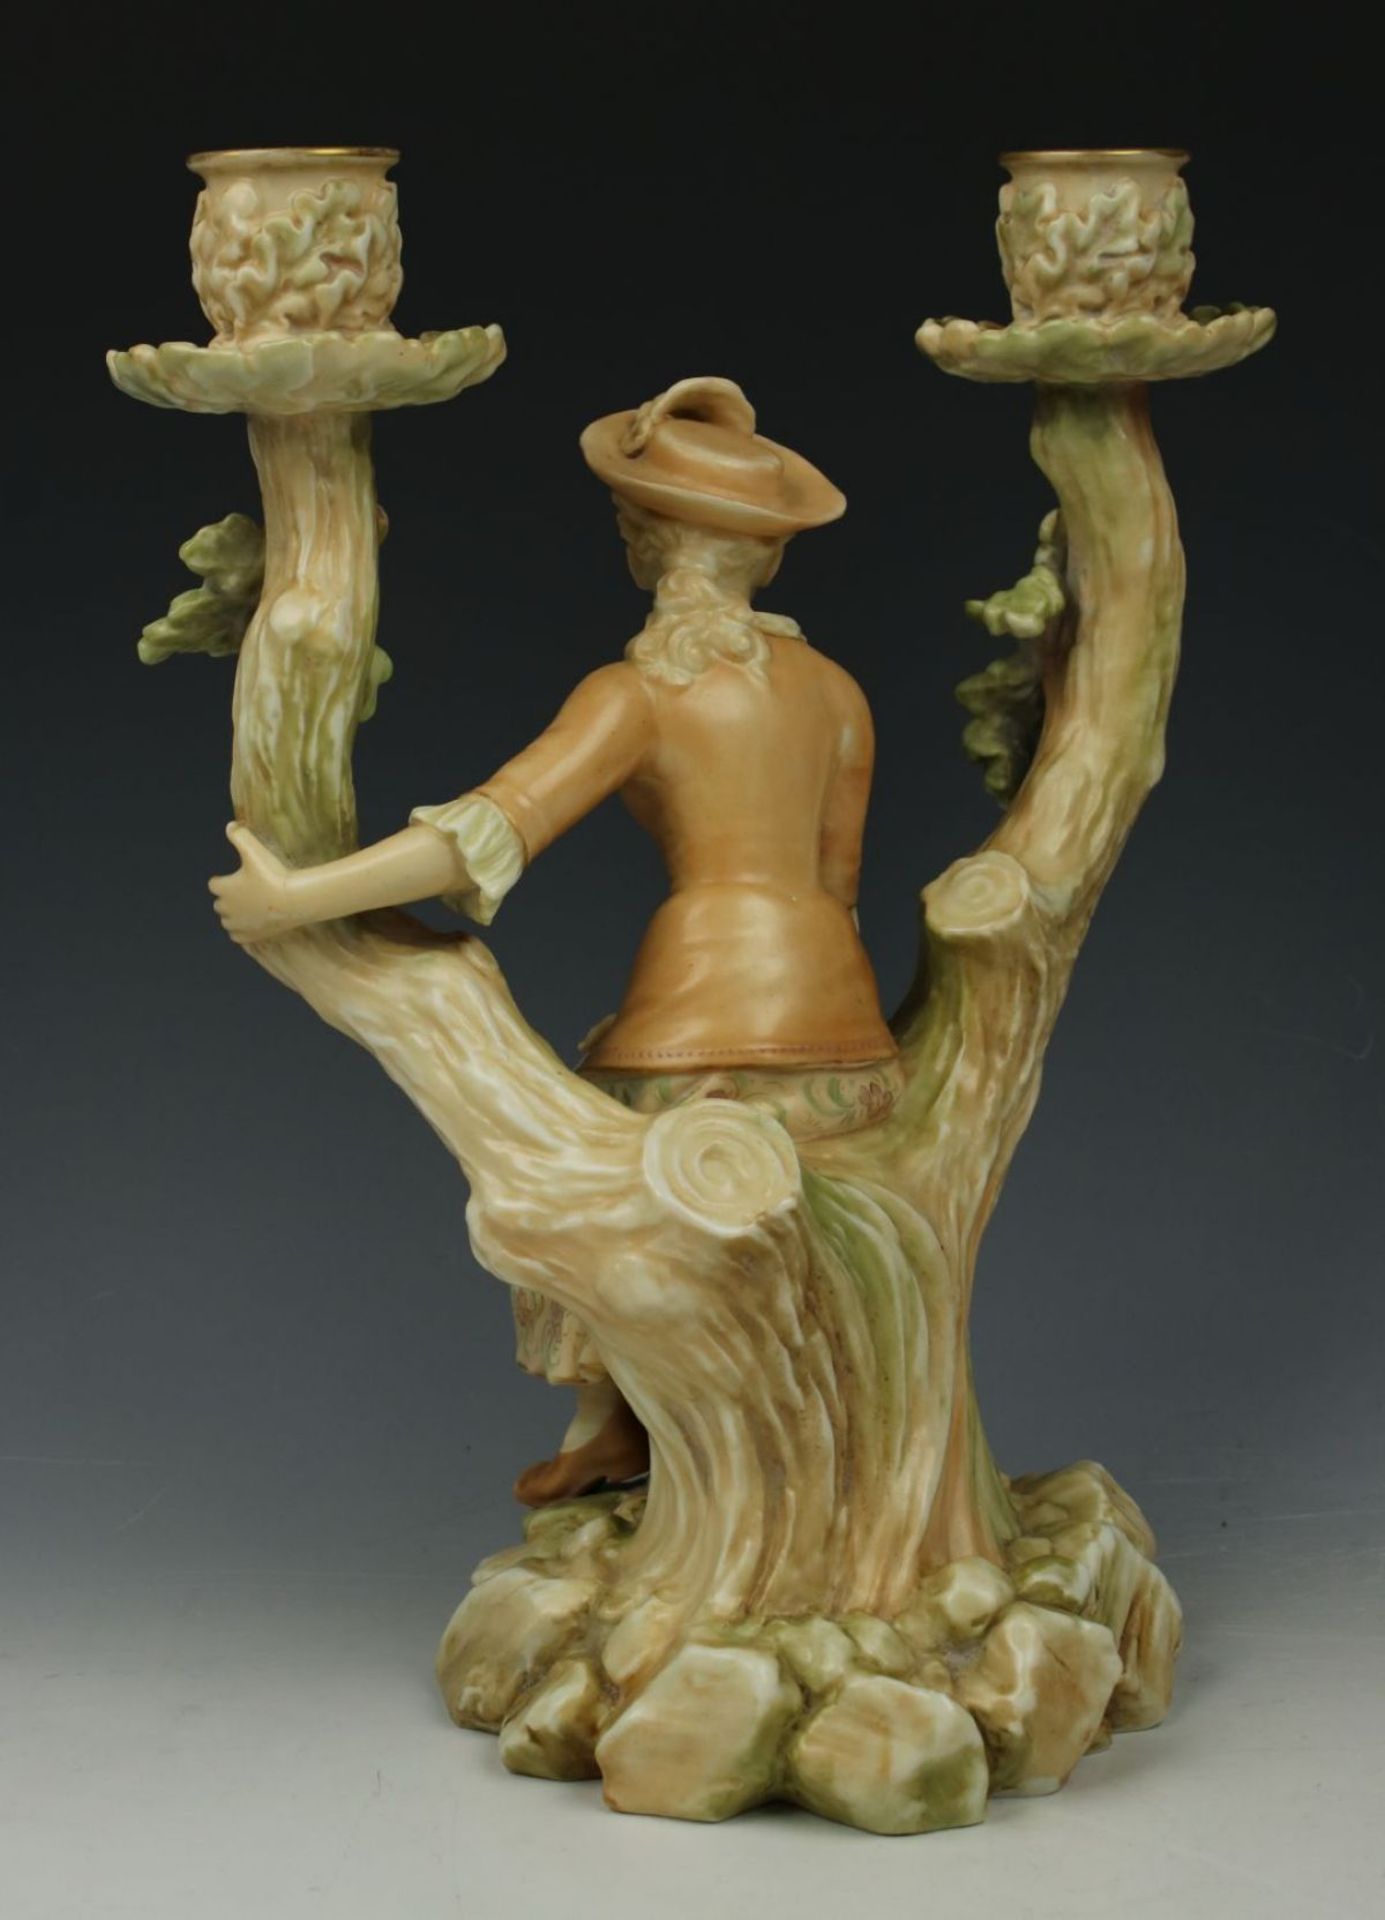 19C Royal Worcester figurine "Candle Holder with Sitting Woman" - Image 3 of 10